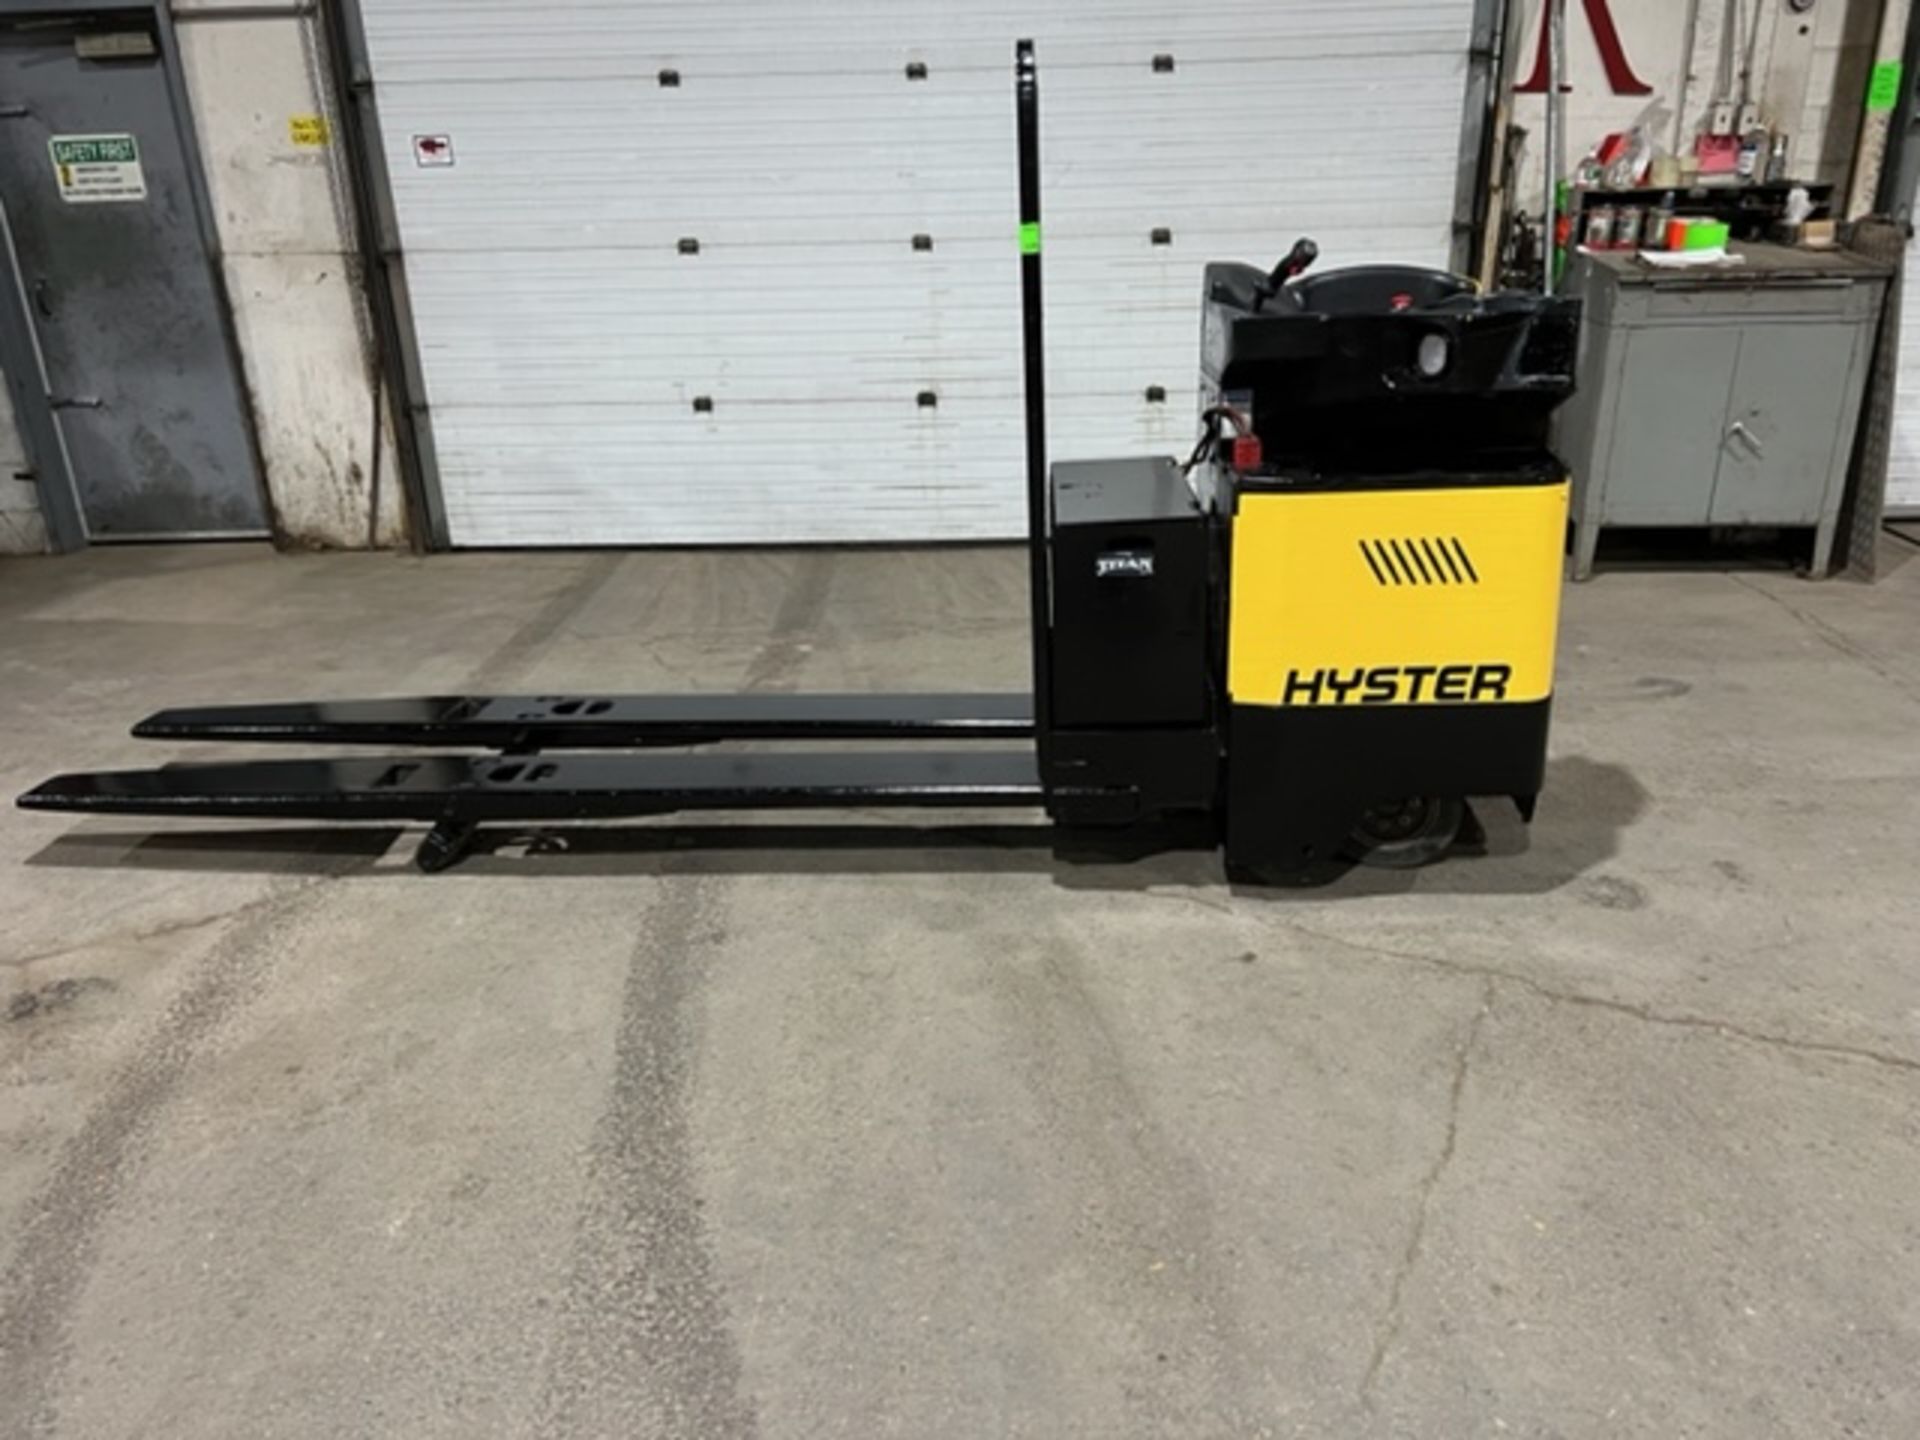 NICE 2015 Hyster Ride-On END RIDER Powered Pallet Truck 8' Long Forks 8000lbs capacity 24V NICE